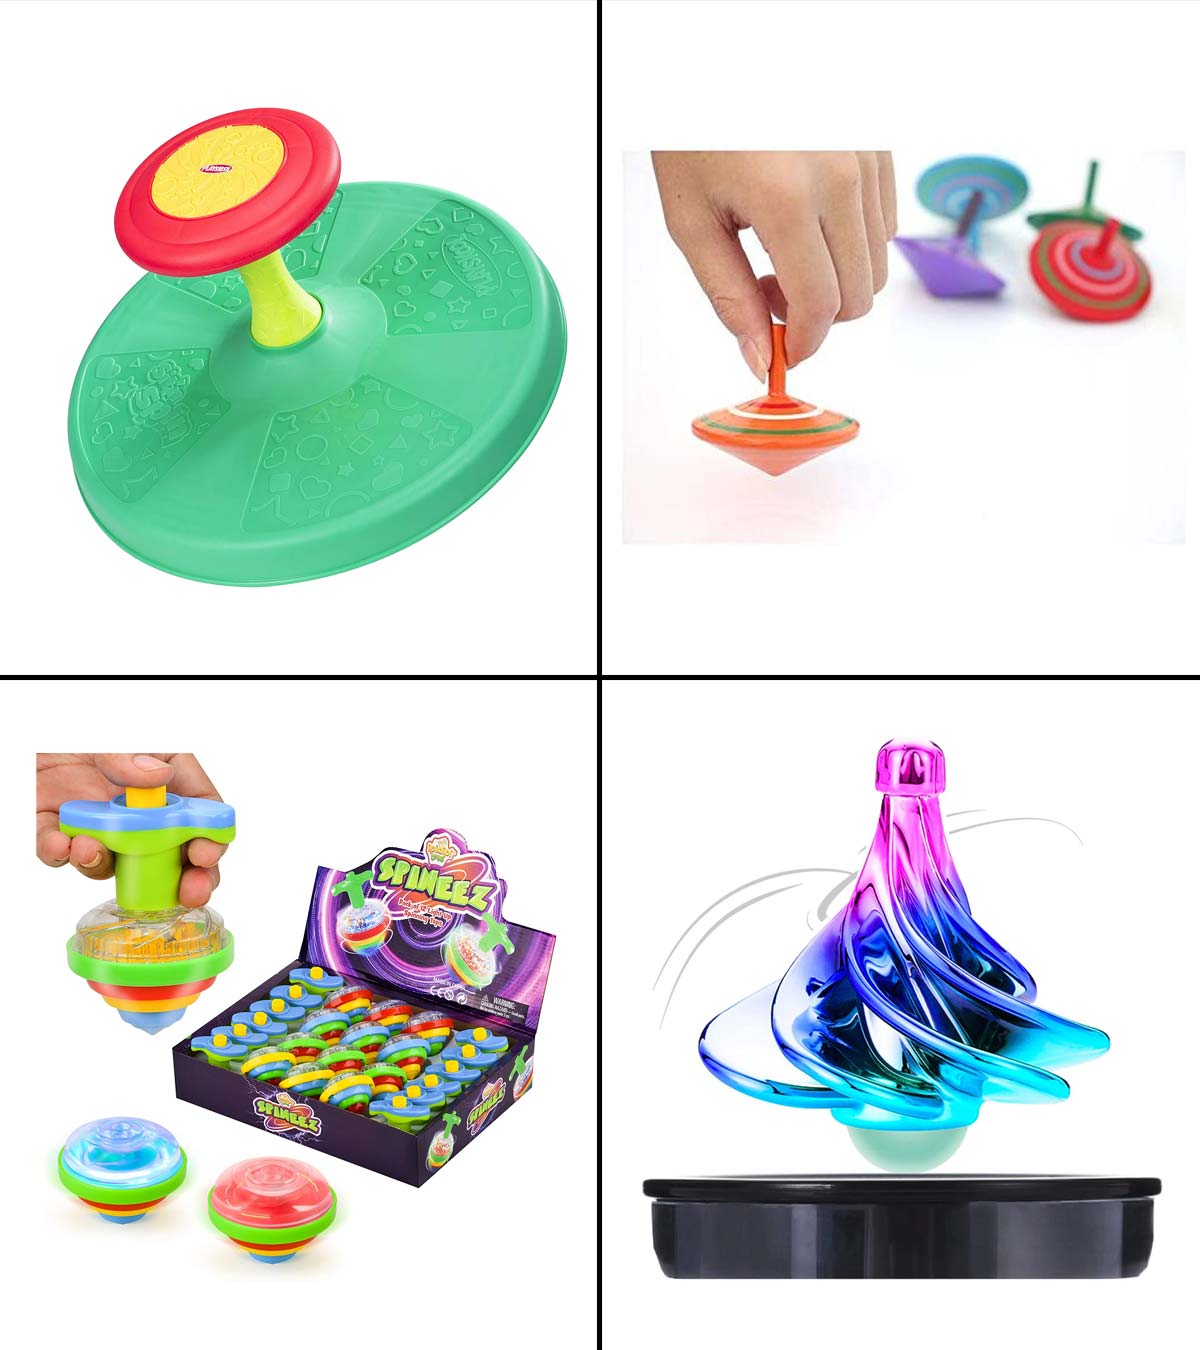 Spinning Top Toy Sensory Fingertip Toy Adult and Child Stress Relief and Anti-Anxiety Toys Interesting Children's Transformable Fingertip Spinning Top 12pcs 